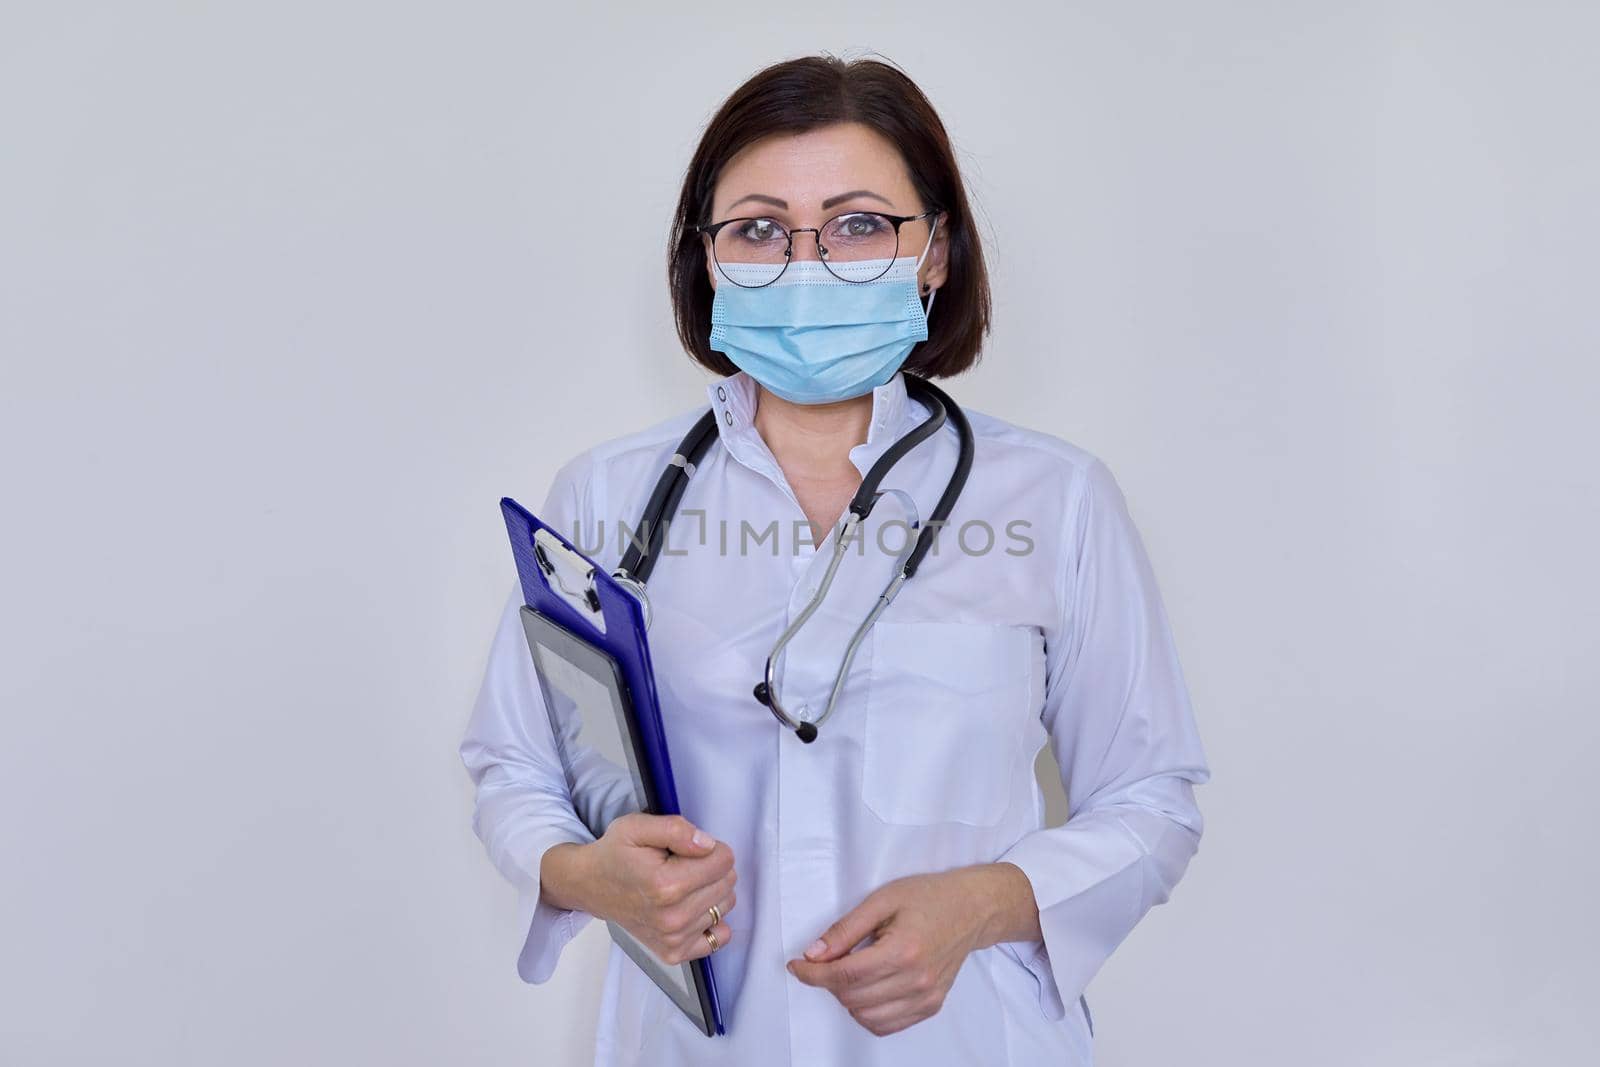 Portrait of female doctor in white uniform in protective medical face mask with stethoscope, with clipboard and digital tablet in her hands, woman looking at camera, on light background